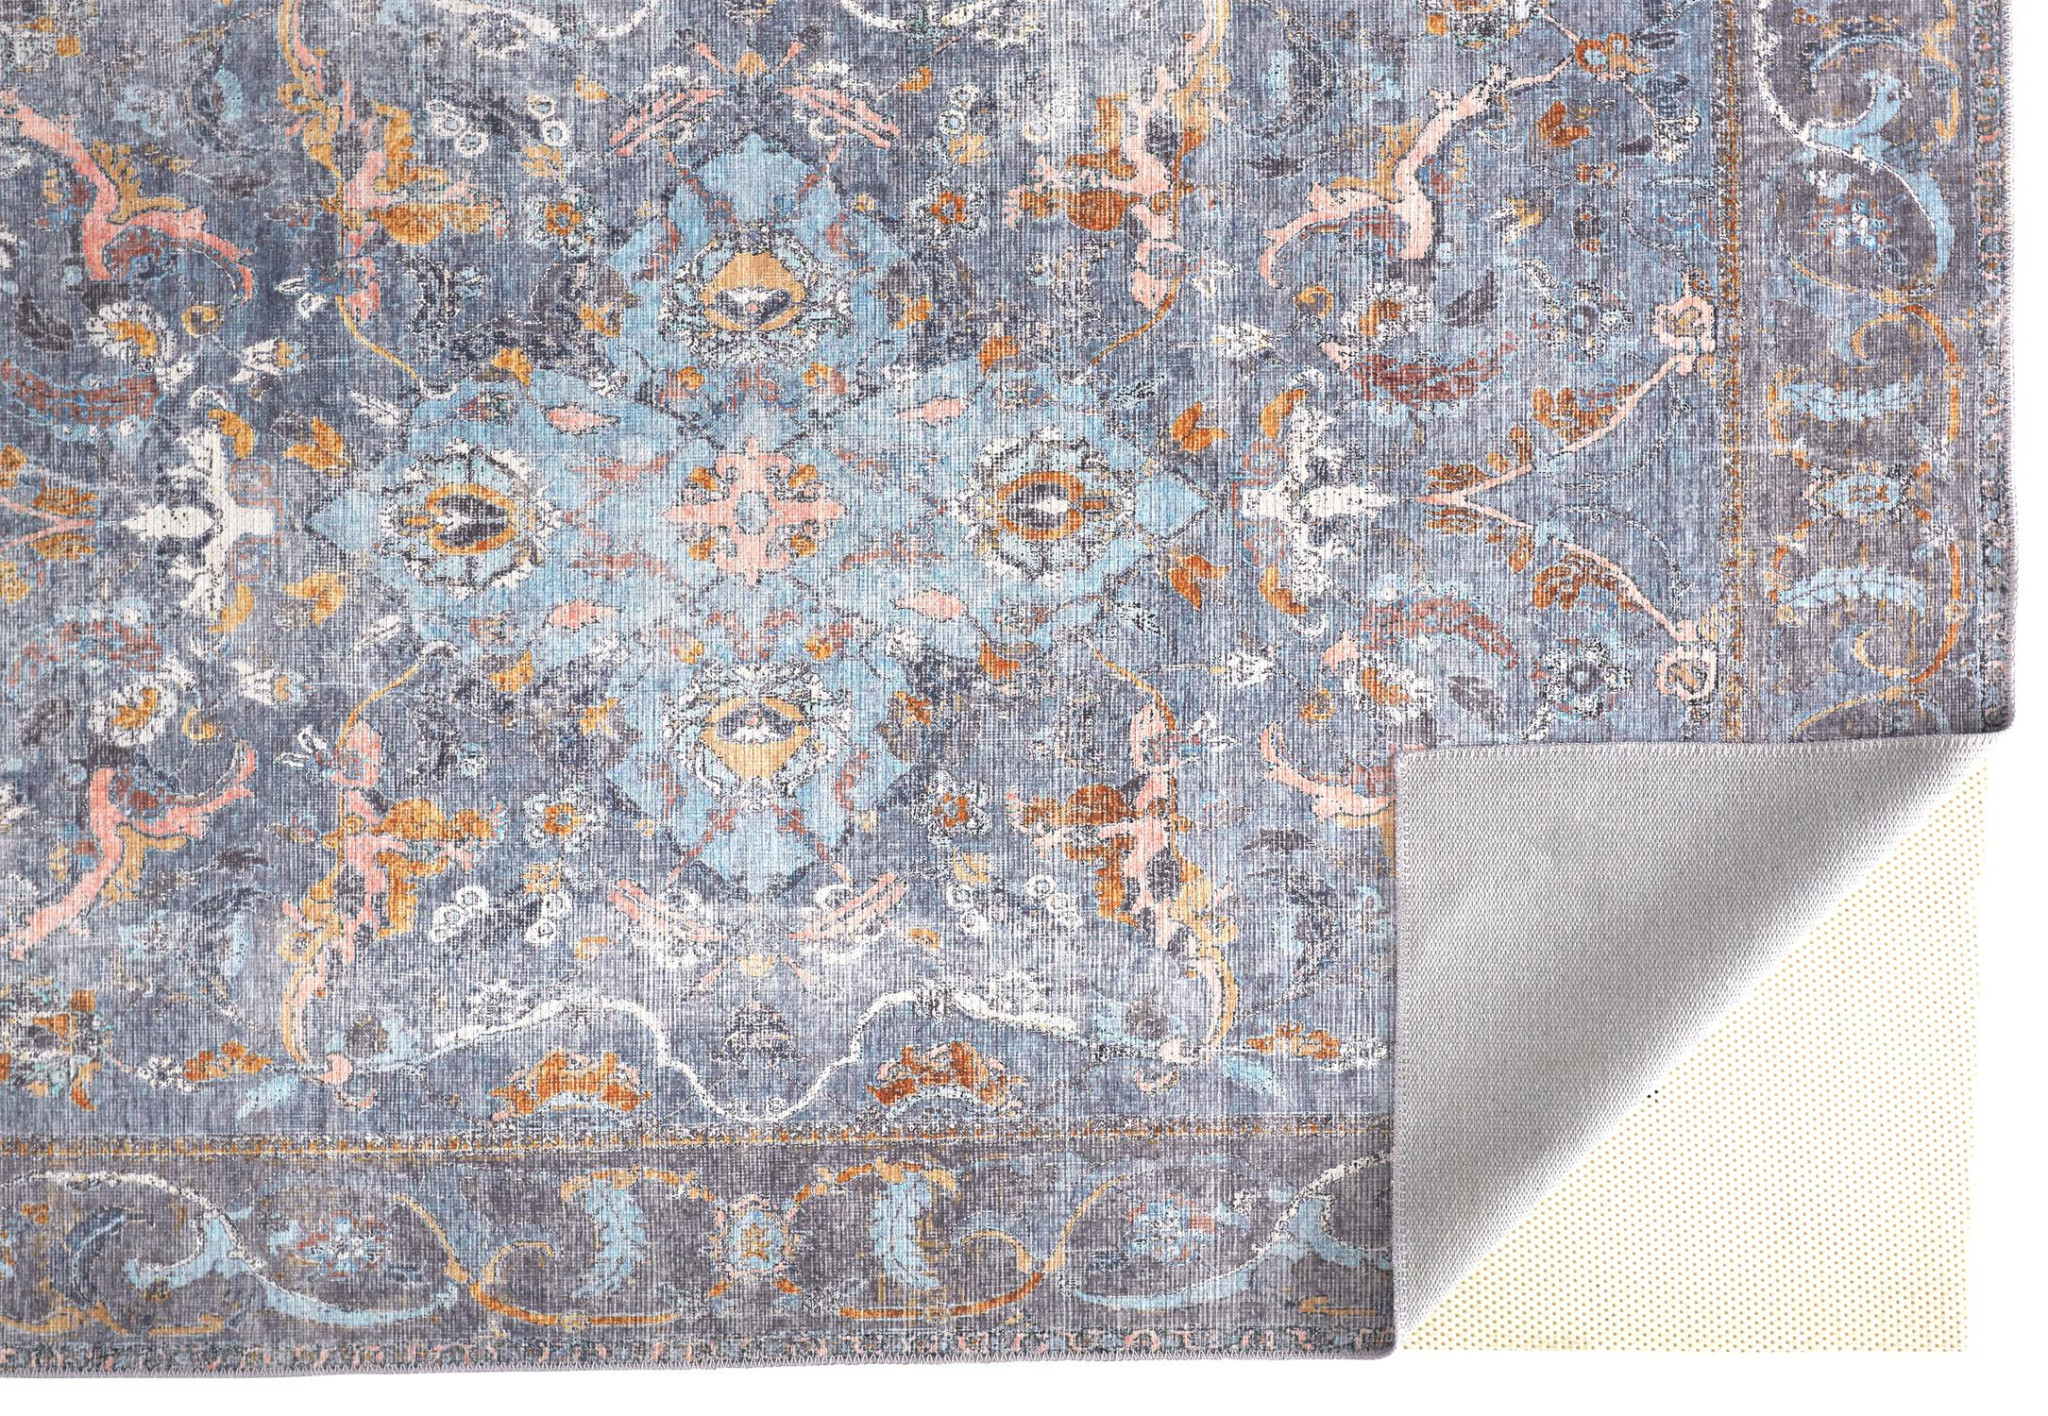 5' X 8' Blue Gray And Orange Floral Area Rug-515052-1